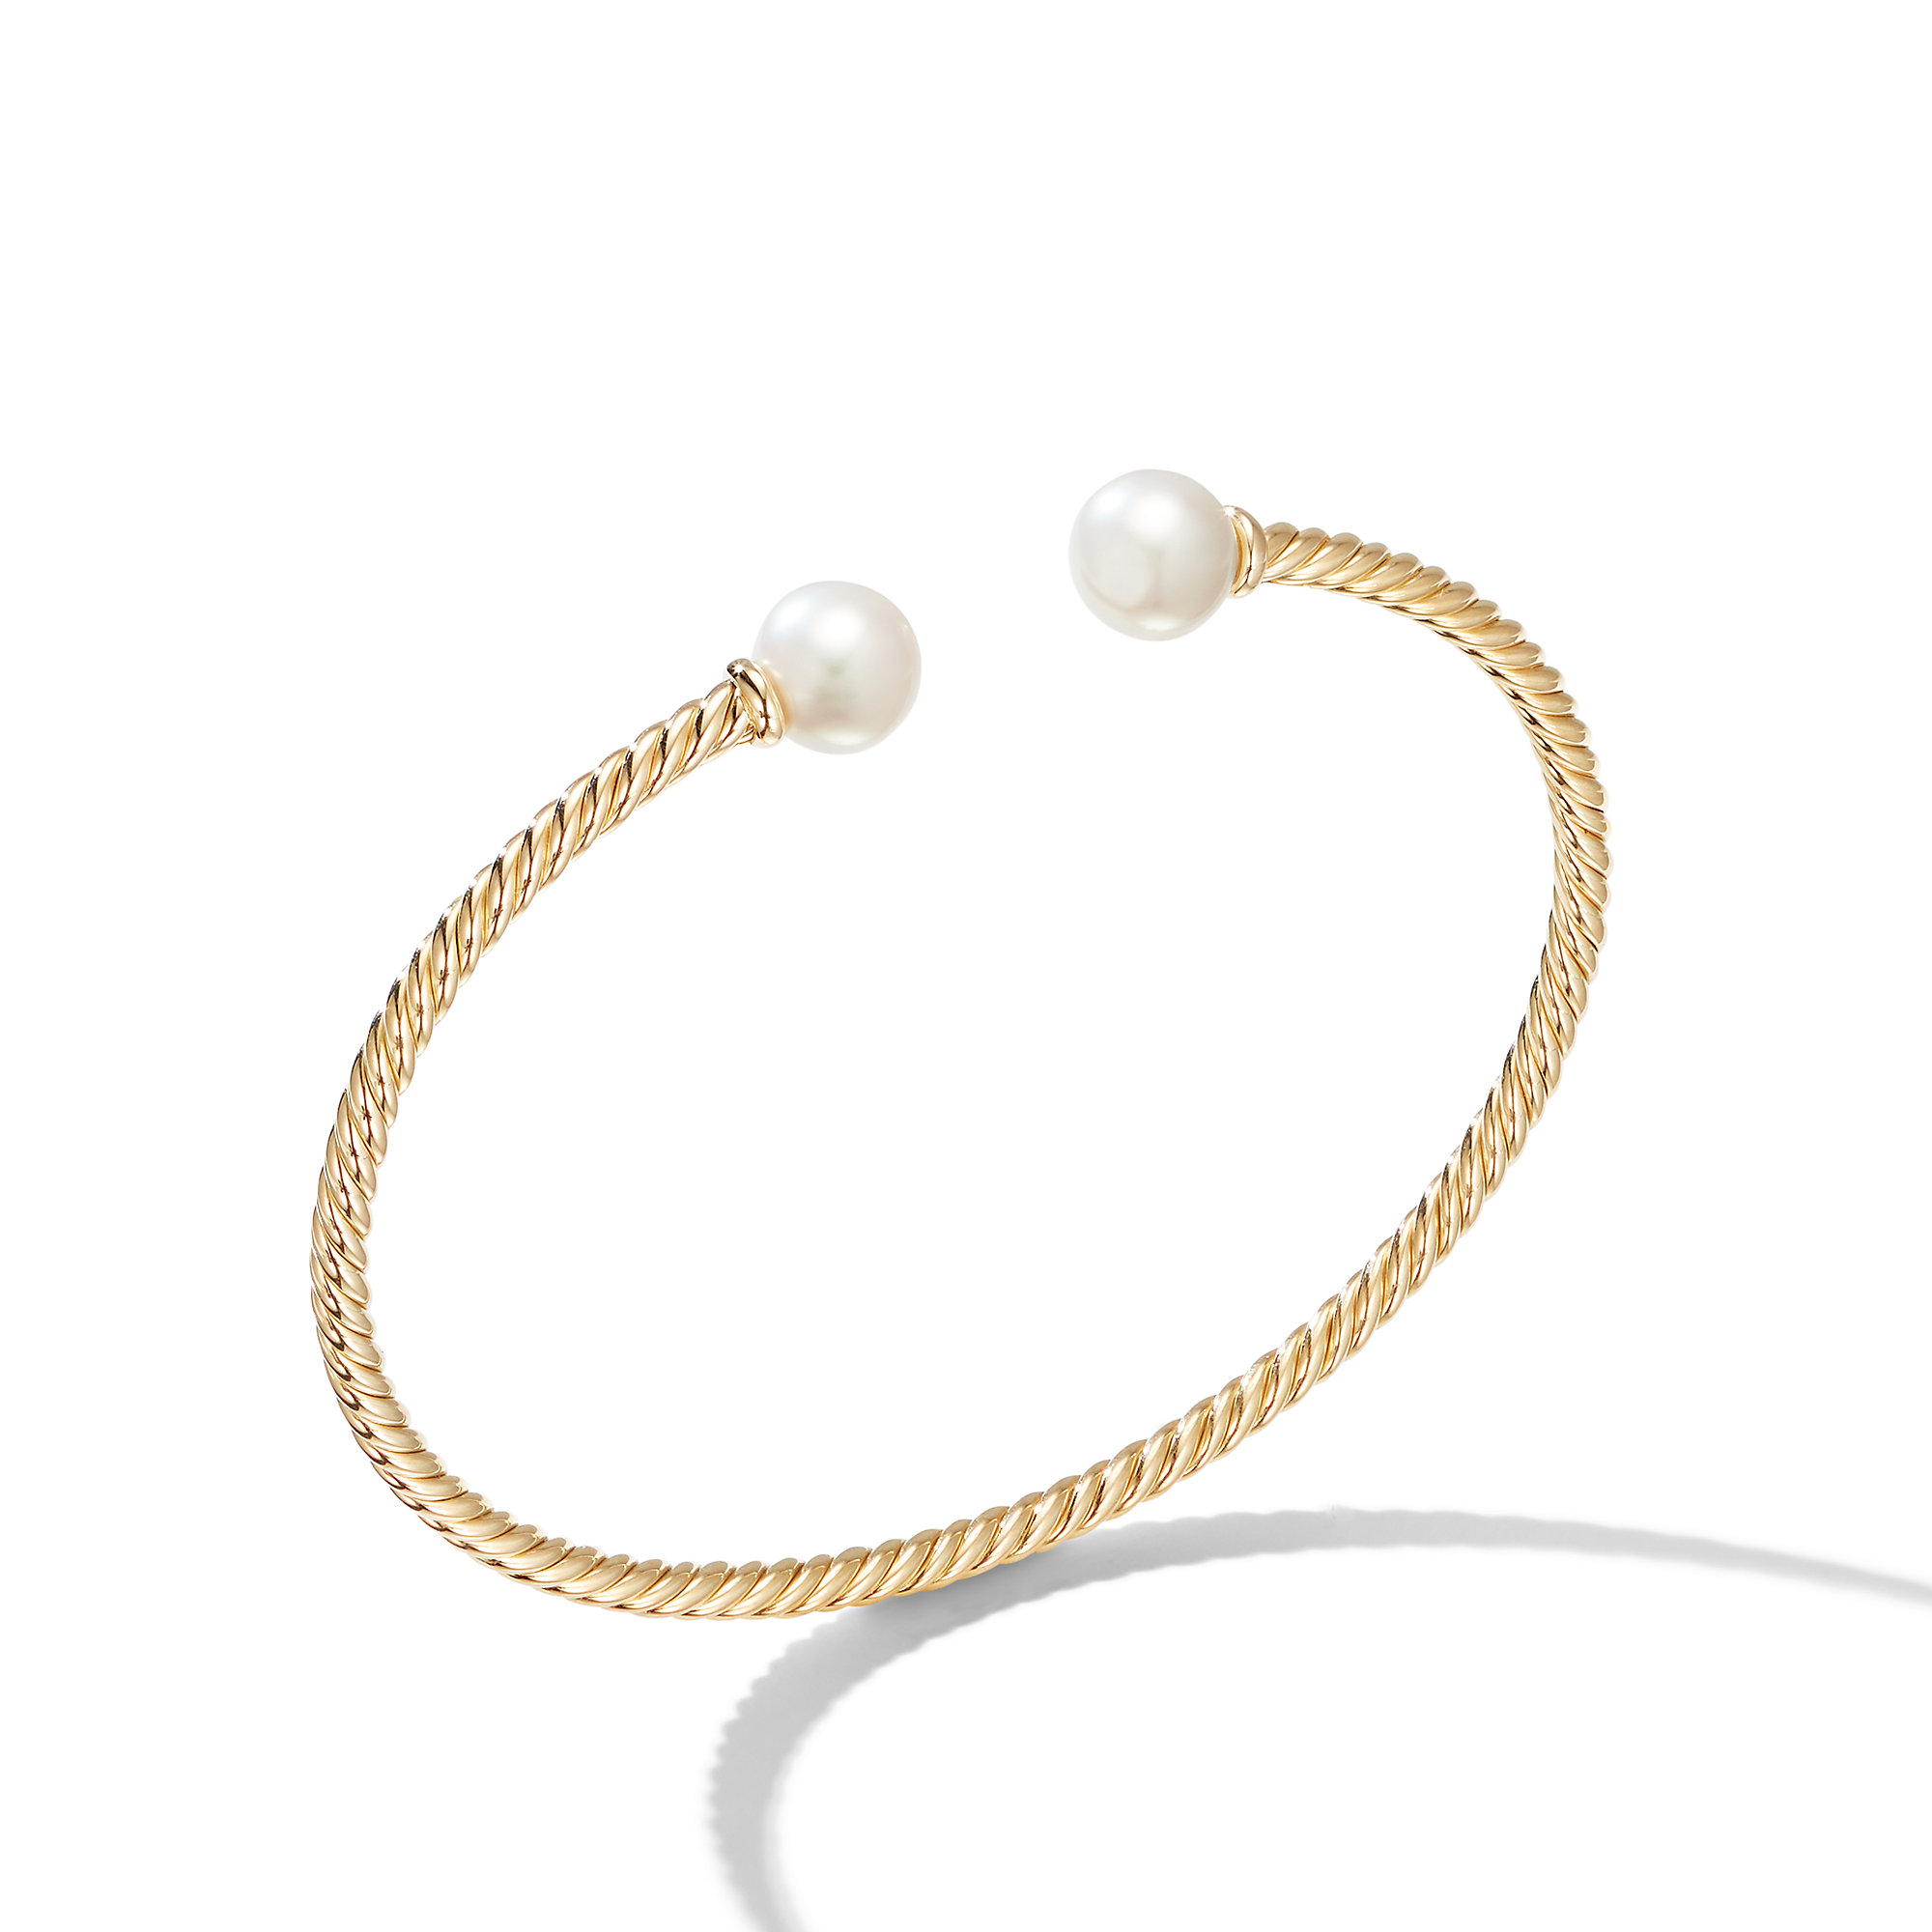 Solari Bead Bracelet in 18K Yellow Gold with Pearls